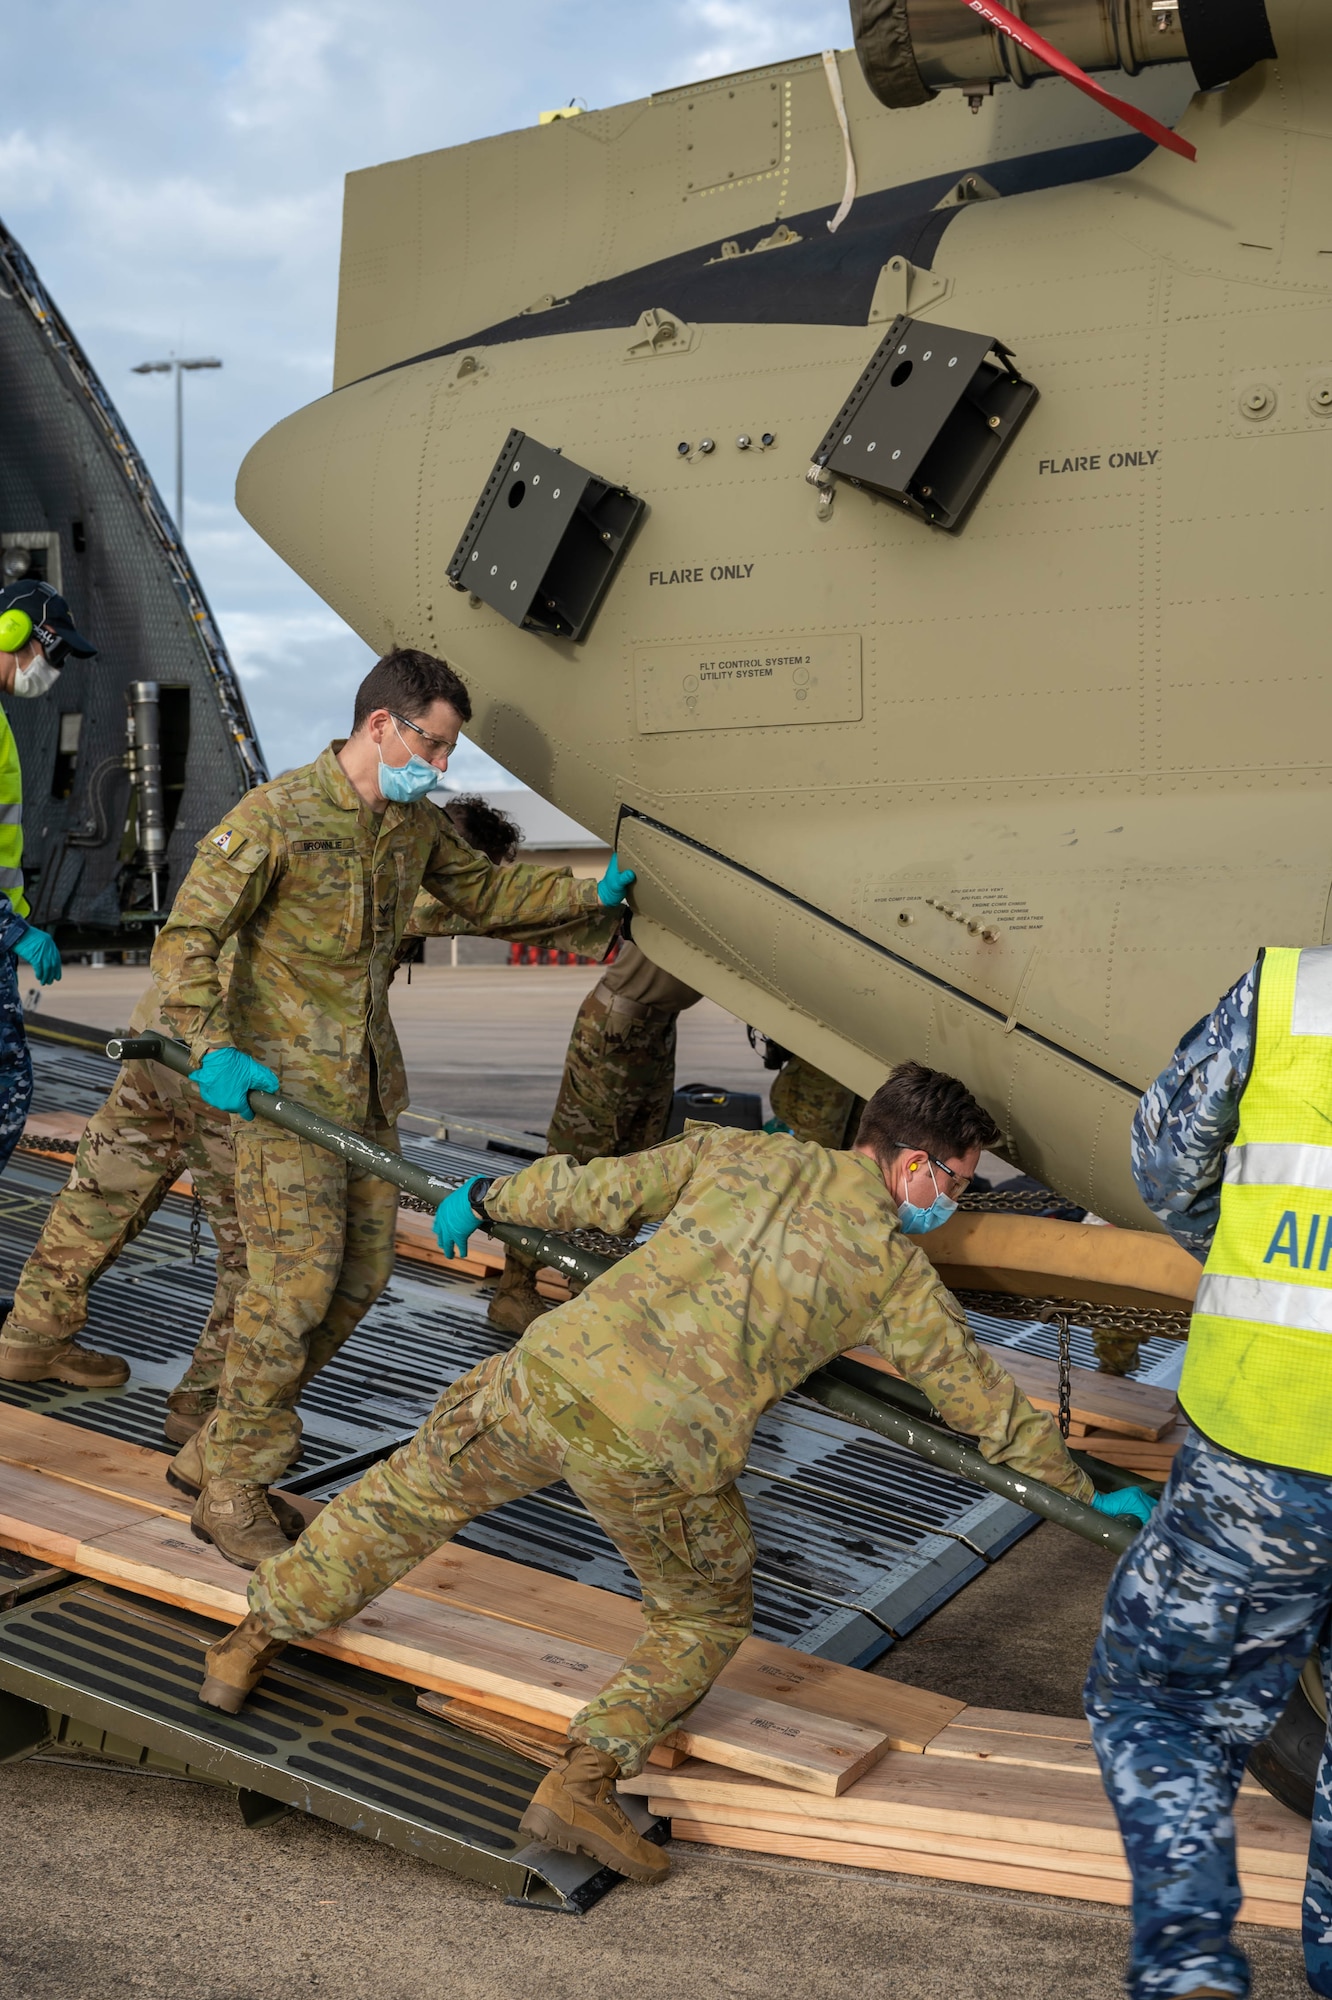 Members of the Royal Australian Army unload a CH-47H Chinook helicopter from a Dover Air Force Base C-5M Super Galaxy at Royal Australian Air Force Base Townsville, Australia, July 7, 2021. The C-5 transported two CH-47F Chinook helicopters to RAAF Base Townsville as a part of the Department of Defense’s Foreign Military Sales program. The U.S. and Australia maintain a robust relationship underpinned by shared democratic values, common interests and cultural bonds. The strong alliance is an anchor for peace and stability in the Indo-Pacific region and around the world. (U.S. Air Force photo by Senior Airman Faith Schaefer)